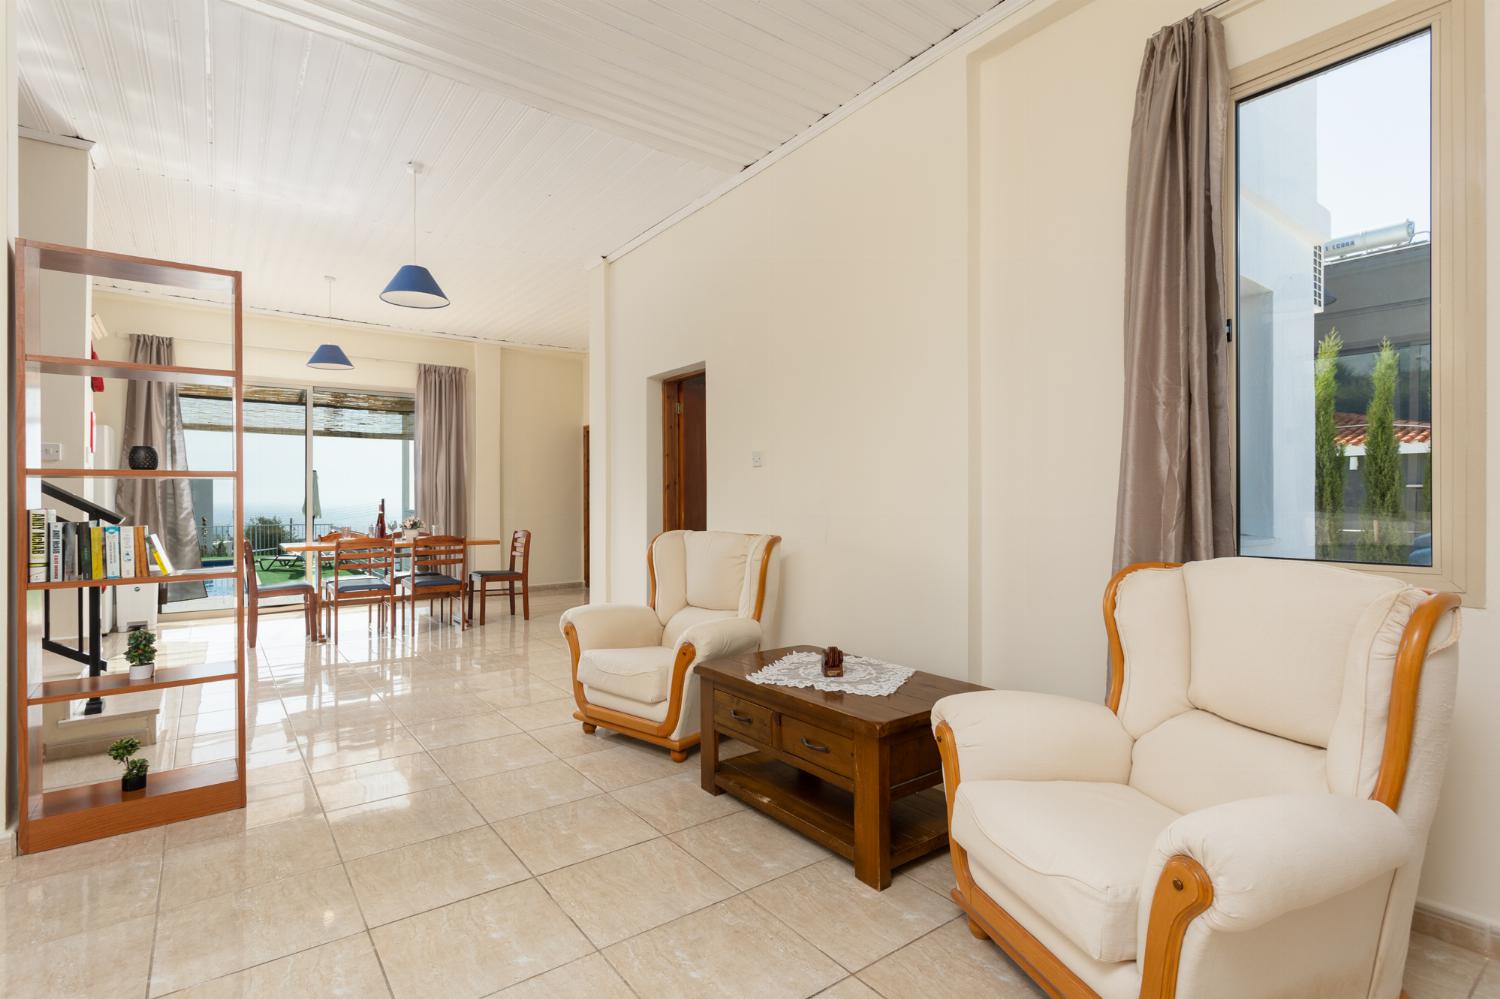 Open-plan living room on ground floor with sofa and seats, dining area, kitchen, WiFi internet, satellite TV, and sea views